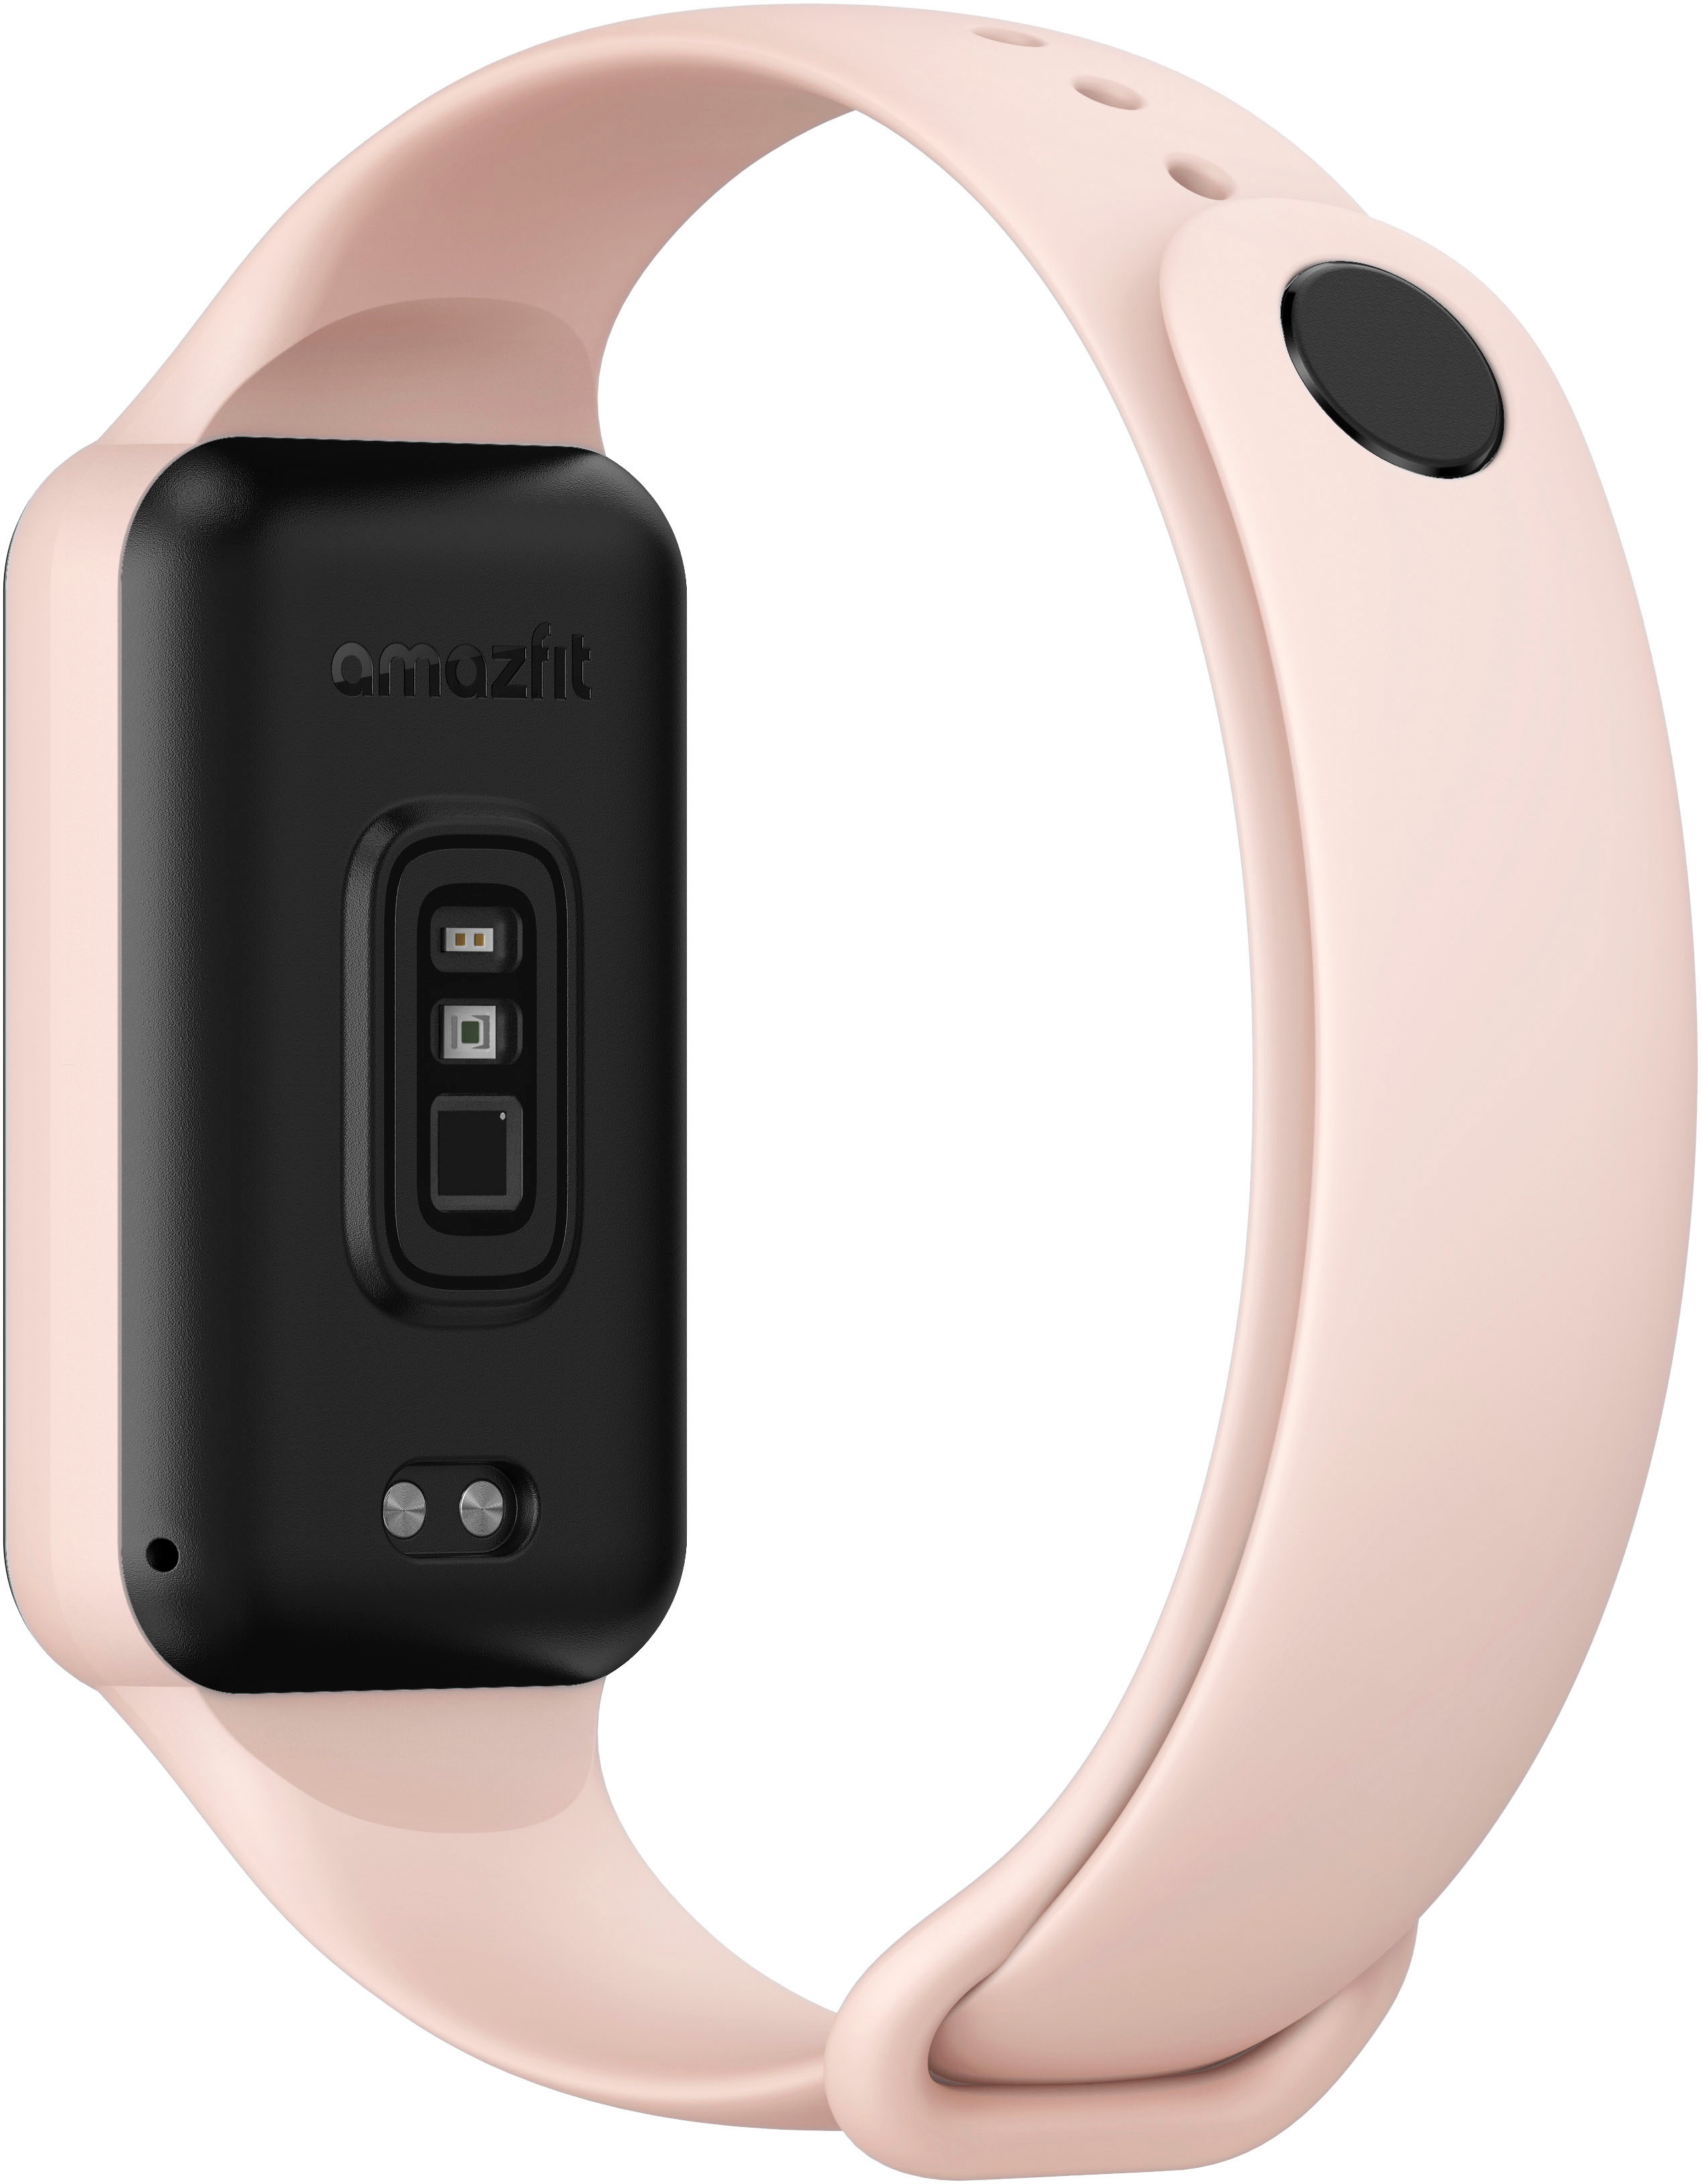 Amazfit Band 7 price, specs, and renderings show that the Xiaomi